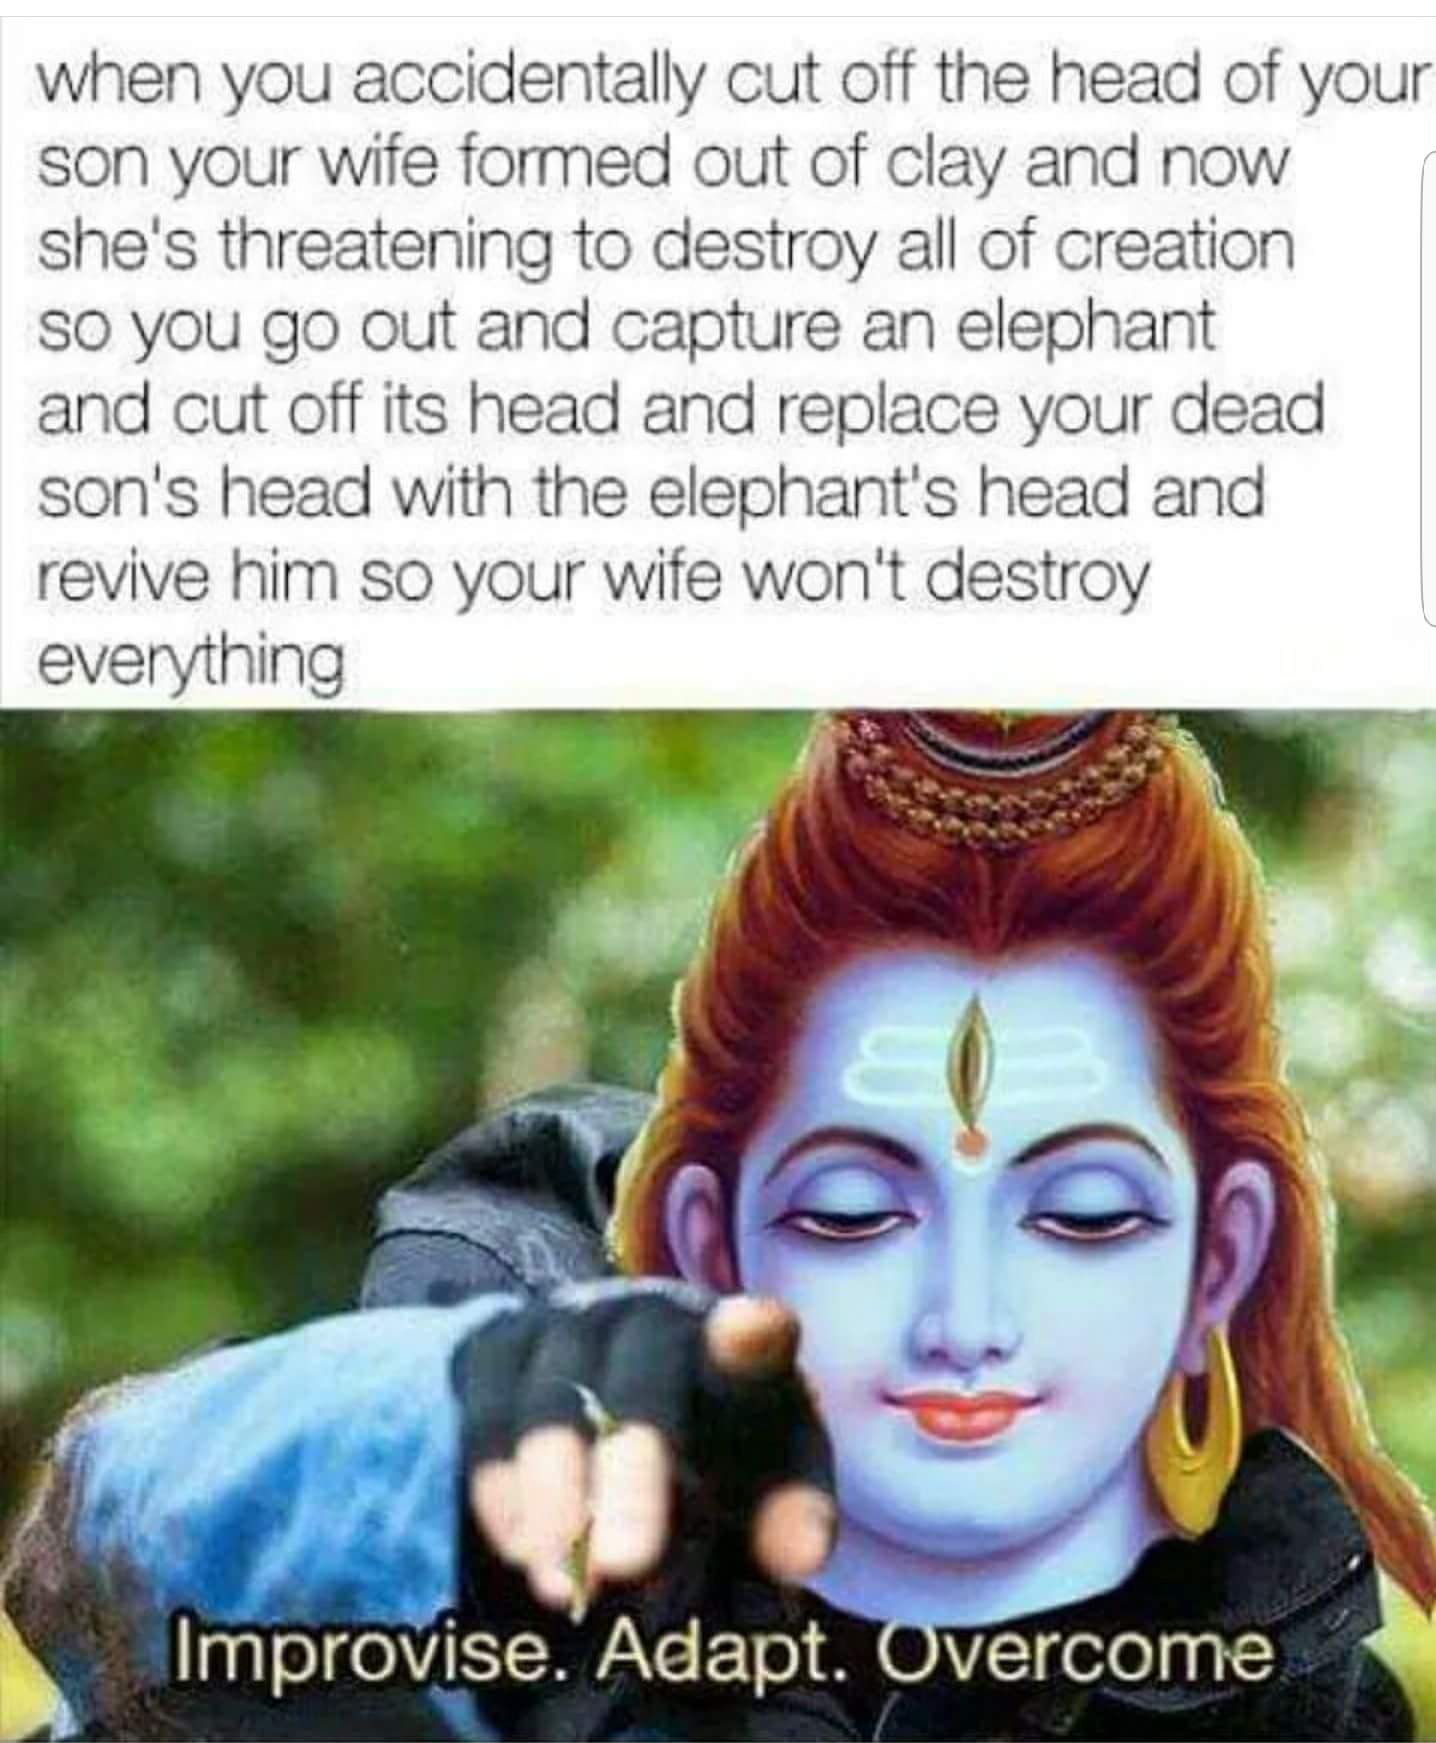 adapt improvise and overcome meme - when you accidentally cut off the head of your son your wife formed out of clay and now she's threatening to destroy all of creation so you go out and capture an elephant and cut off its head and replace your dead son's